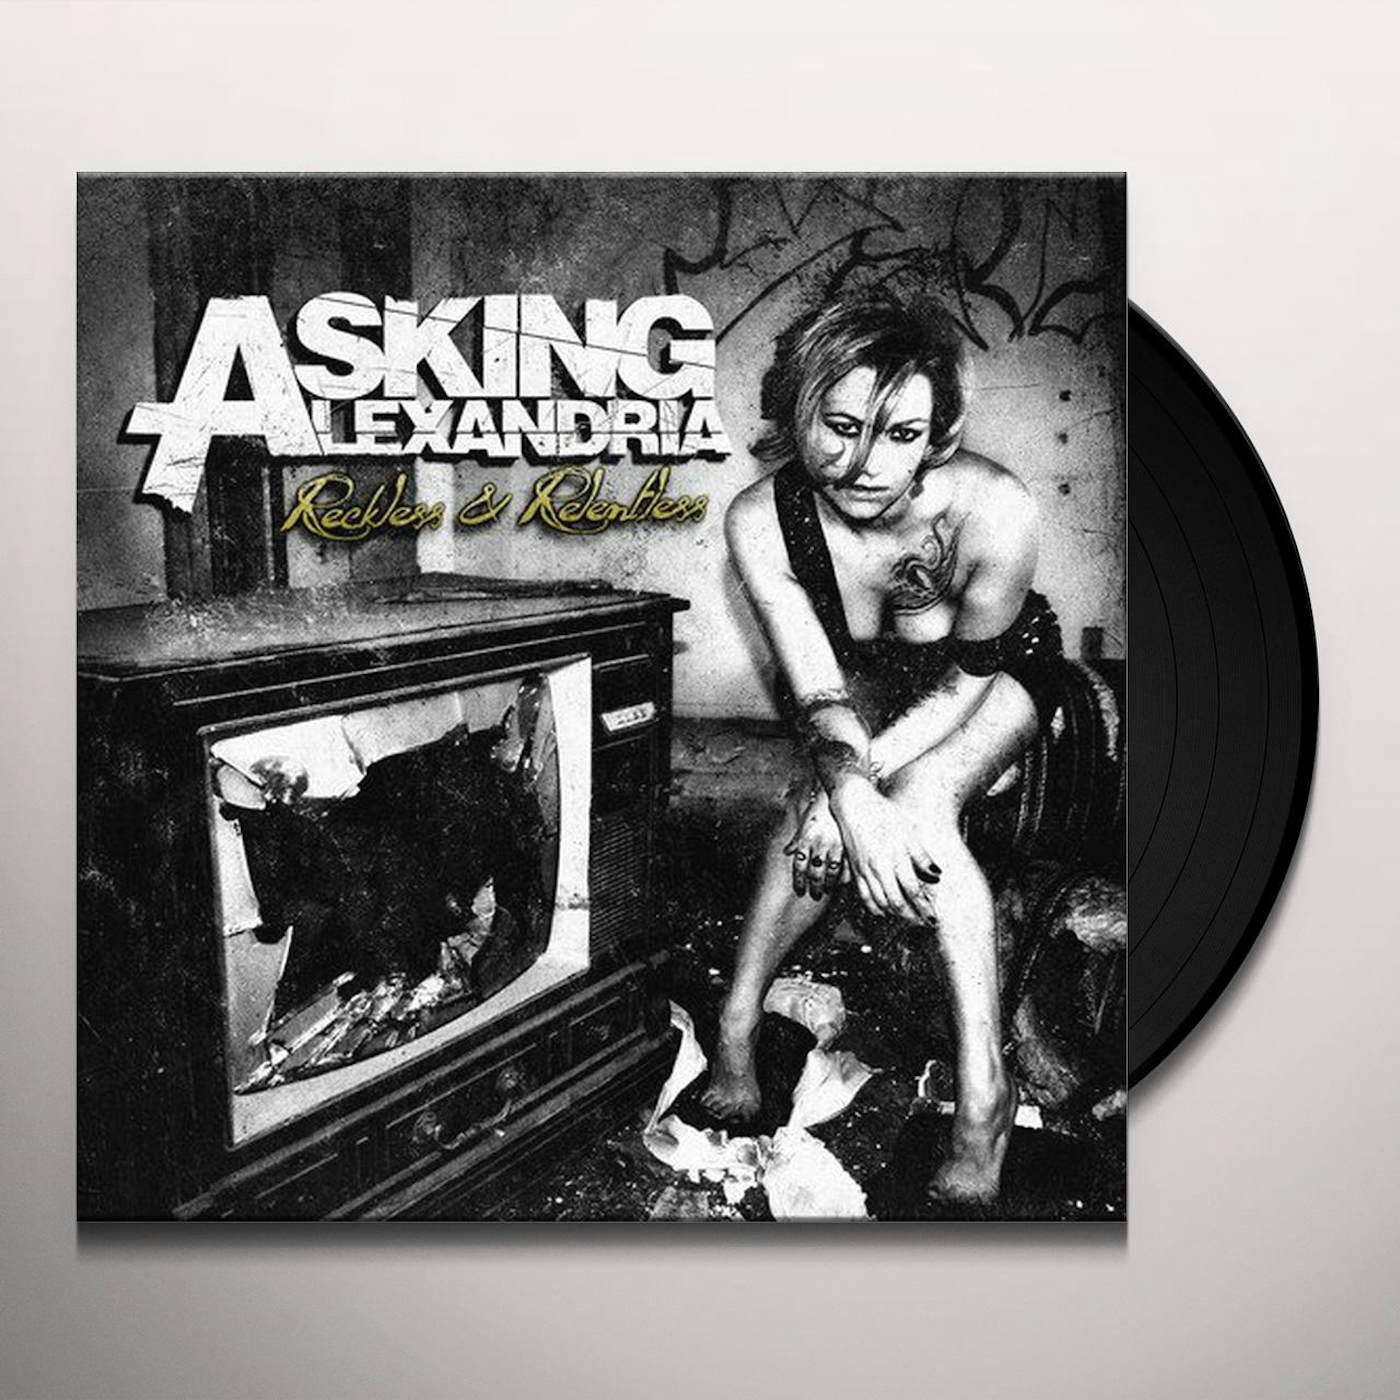 Asking Alexandria Reckless And Relentless Vinyl Record